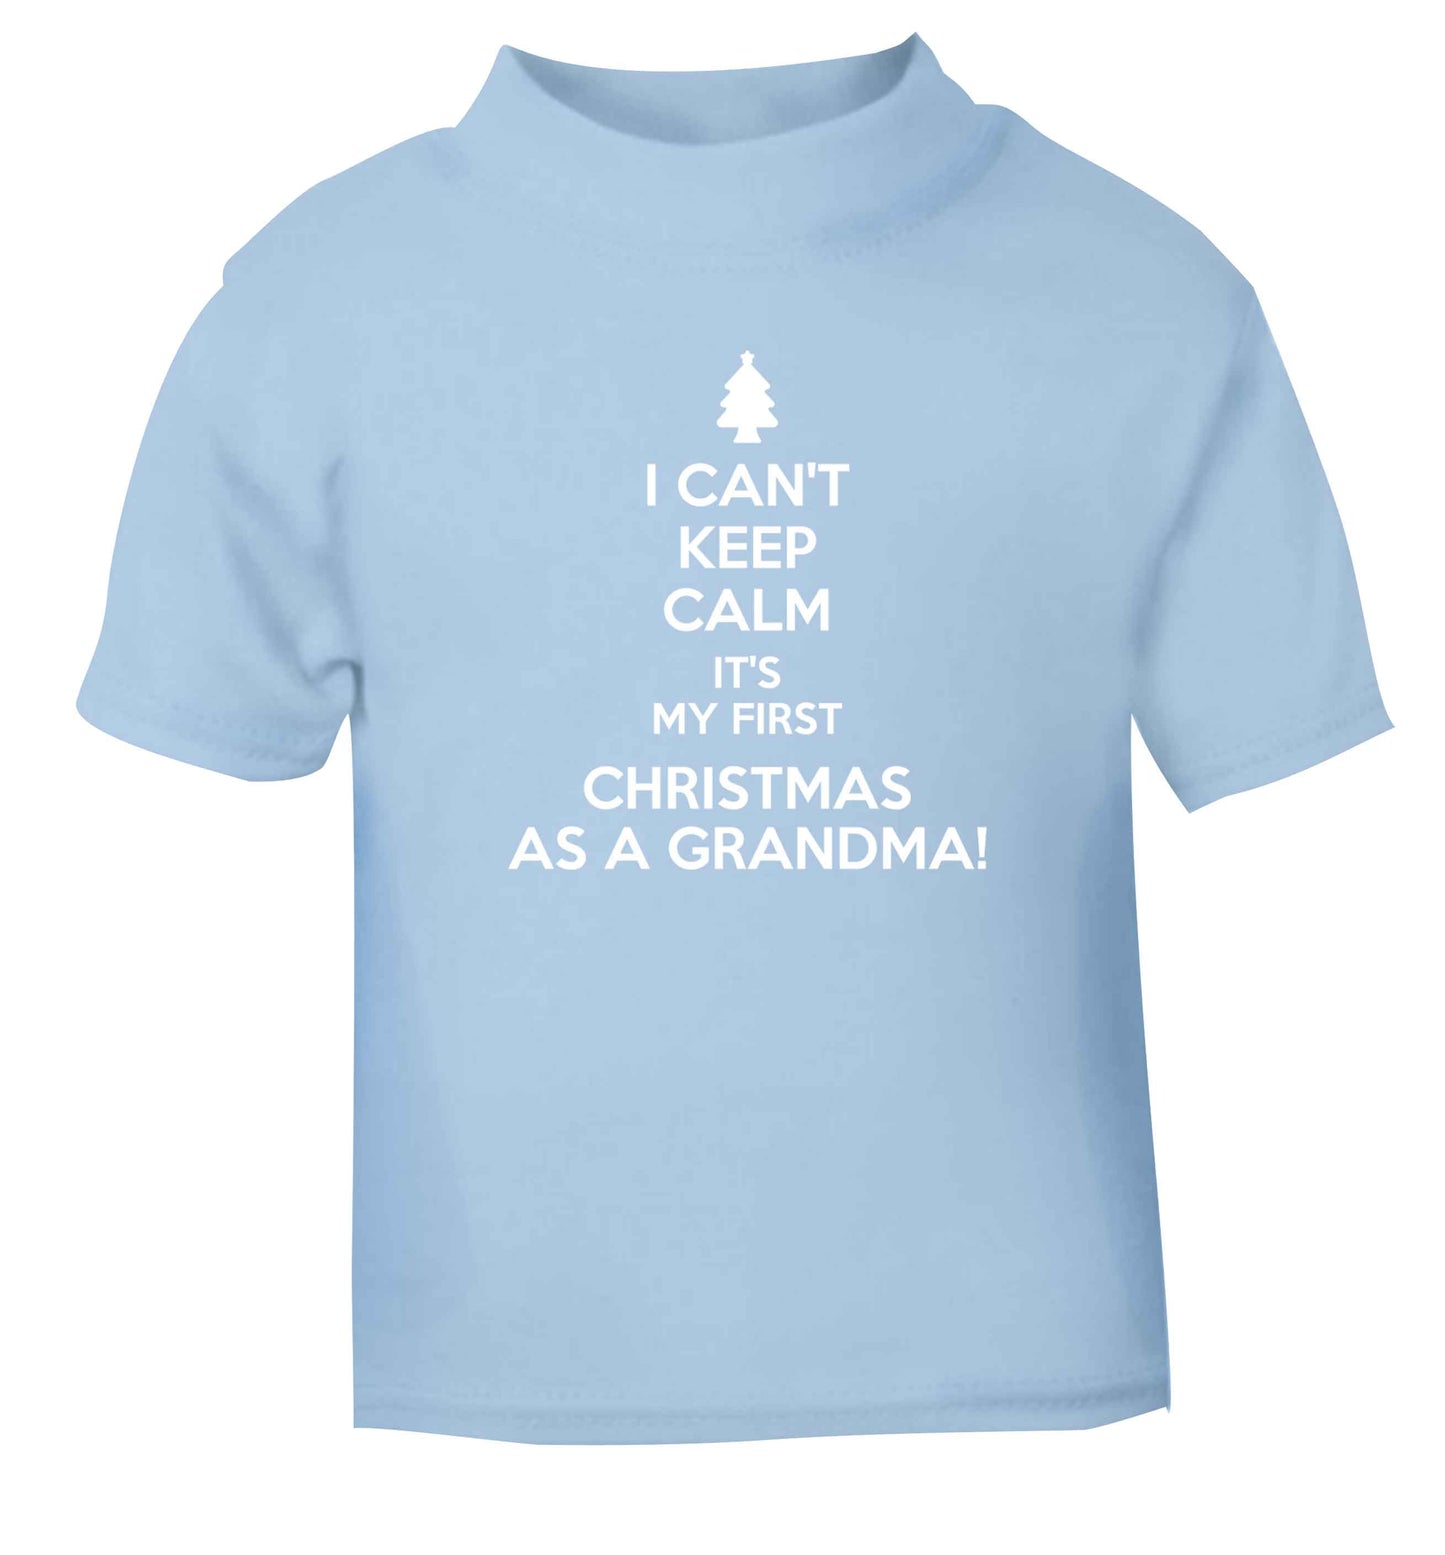 I can't keep calm it's my first Christmas as a grandma! light blue Baby Toddler Tshirt 2 Years